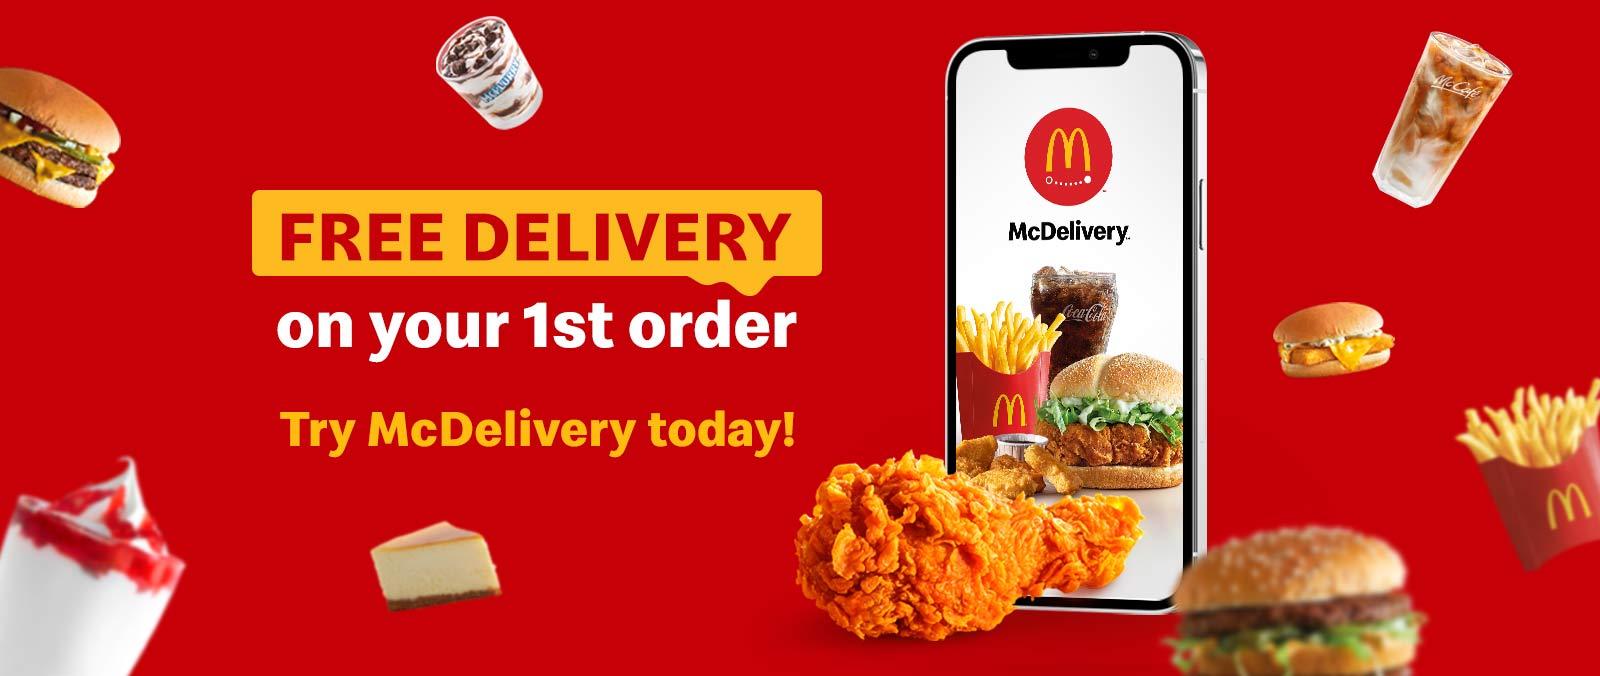 Enjoy FREE first delivery's image'